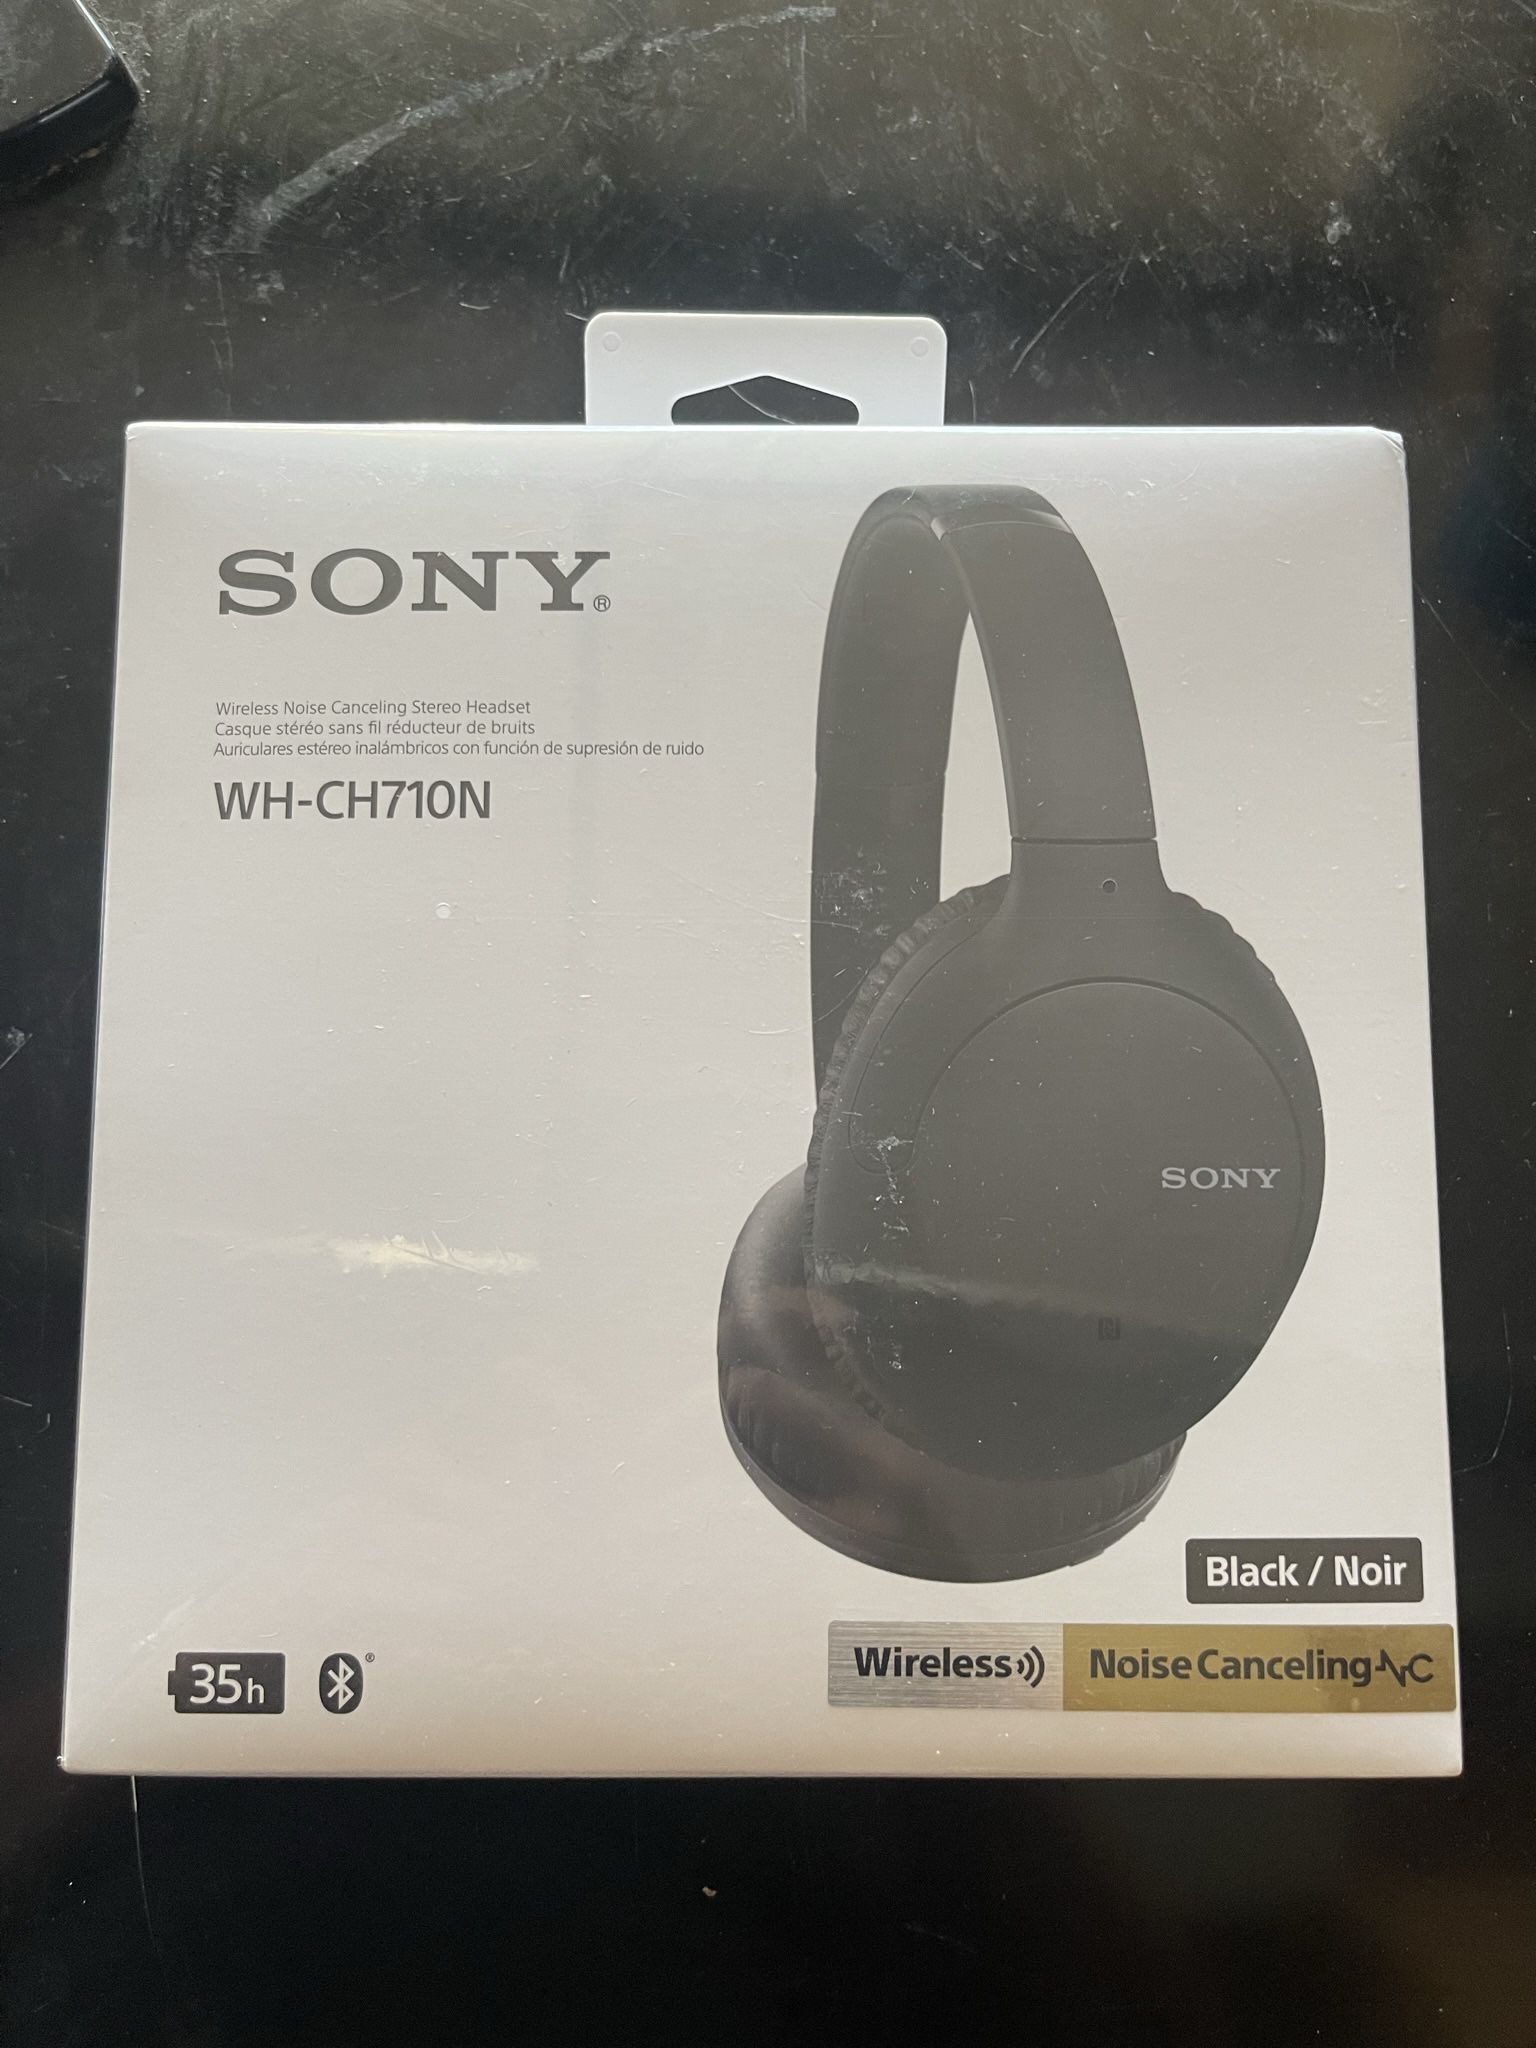 BRAND NEW Sony Noise Cancelling Headphones WHCH710N: Wireless Bluetooth Over the Ear Headset with Mic for Phone-Call, Black